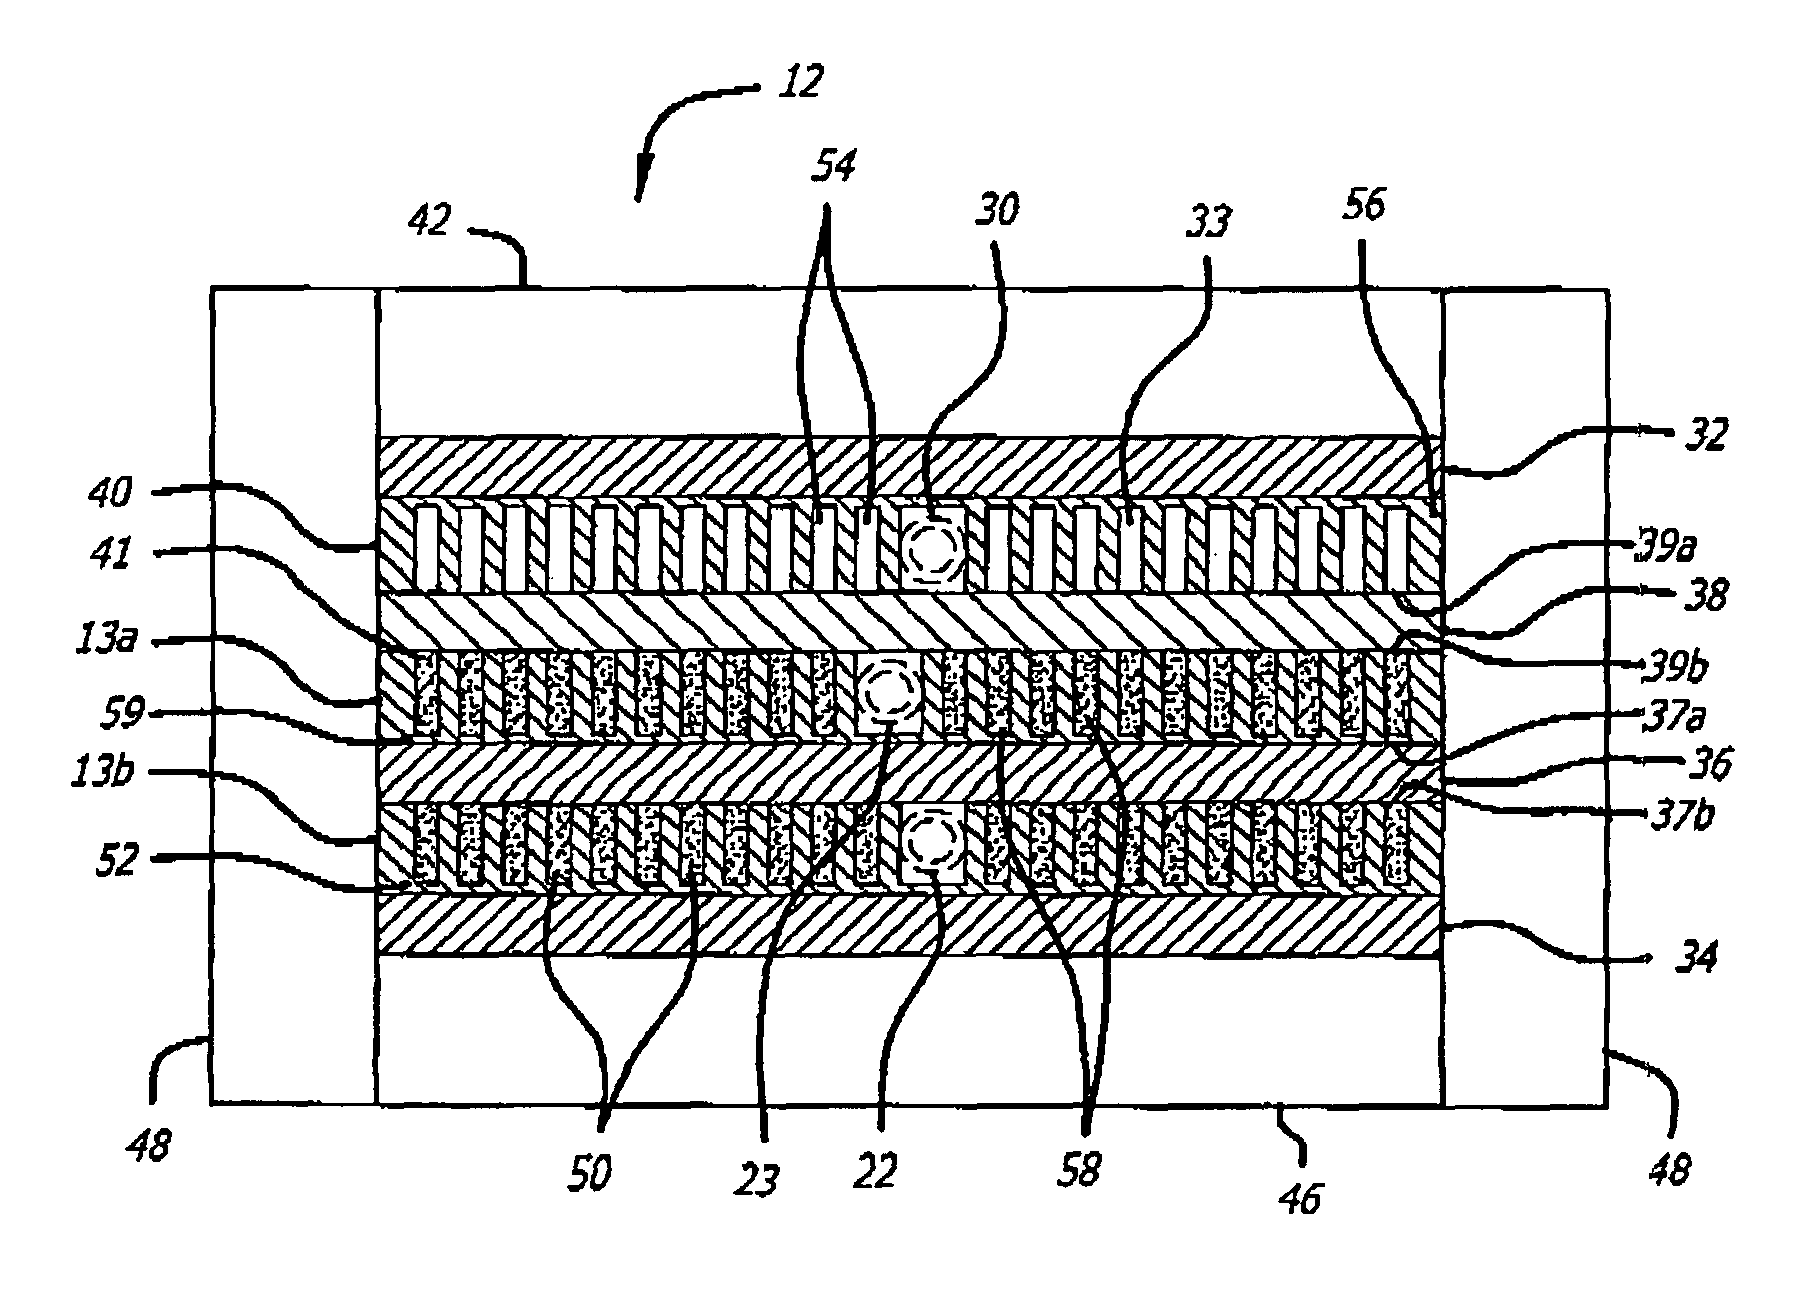 Hydrogen generation apparatus and method for using same